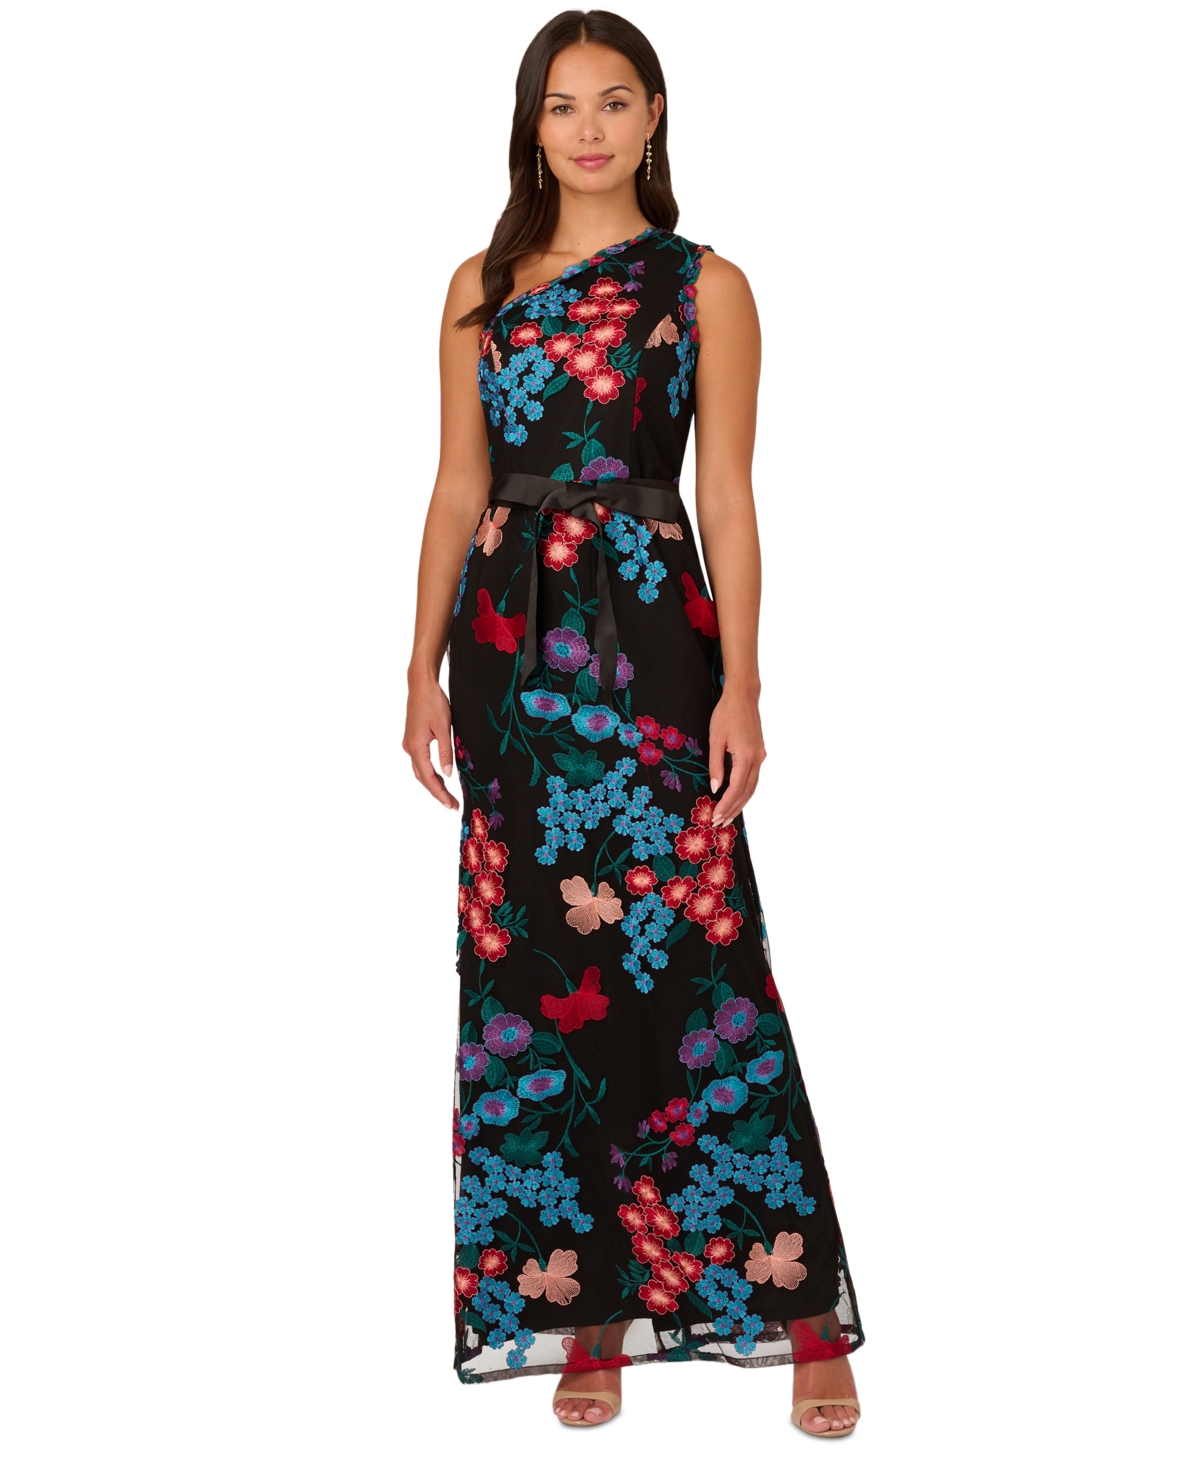 Women's One-Shoulder Embroidered Gown - Black Multi